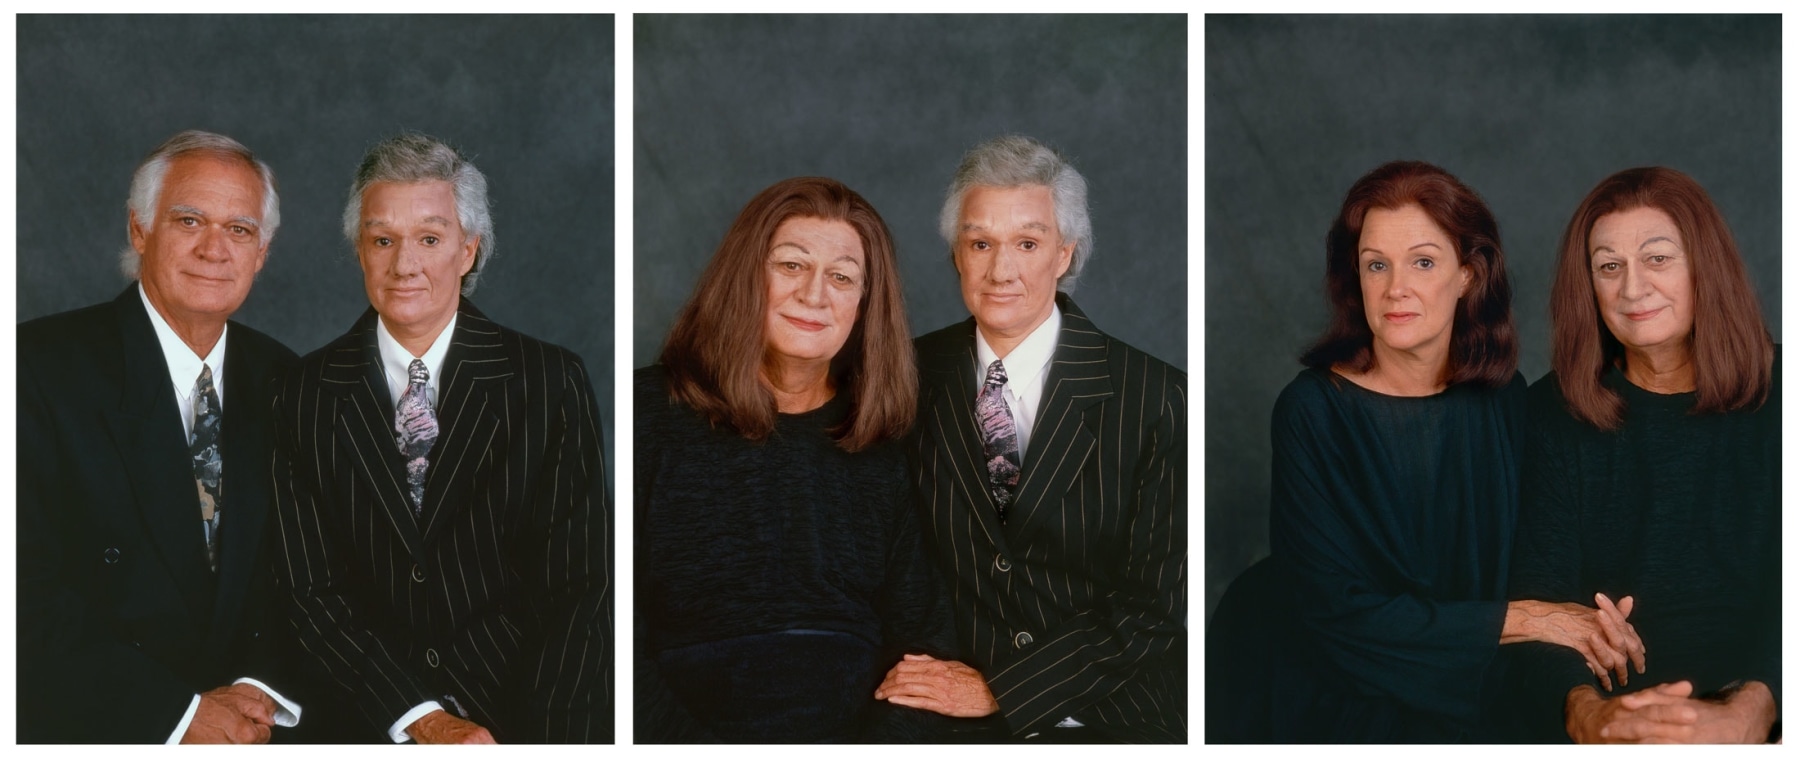 Janine Antoni
Mom and Dad, 1994
Mother, Father, makeup, cibachrome triptych, artist&amp;#39;s frames
Edition of 6 and 4 artist&amp;#39;s proofs
Each image: 24 x 20 inches (60.96 x 52.8 cm)
Each framed: 30 x 34 inches (76.2 x 86.4 cm)